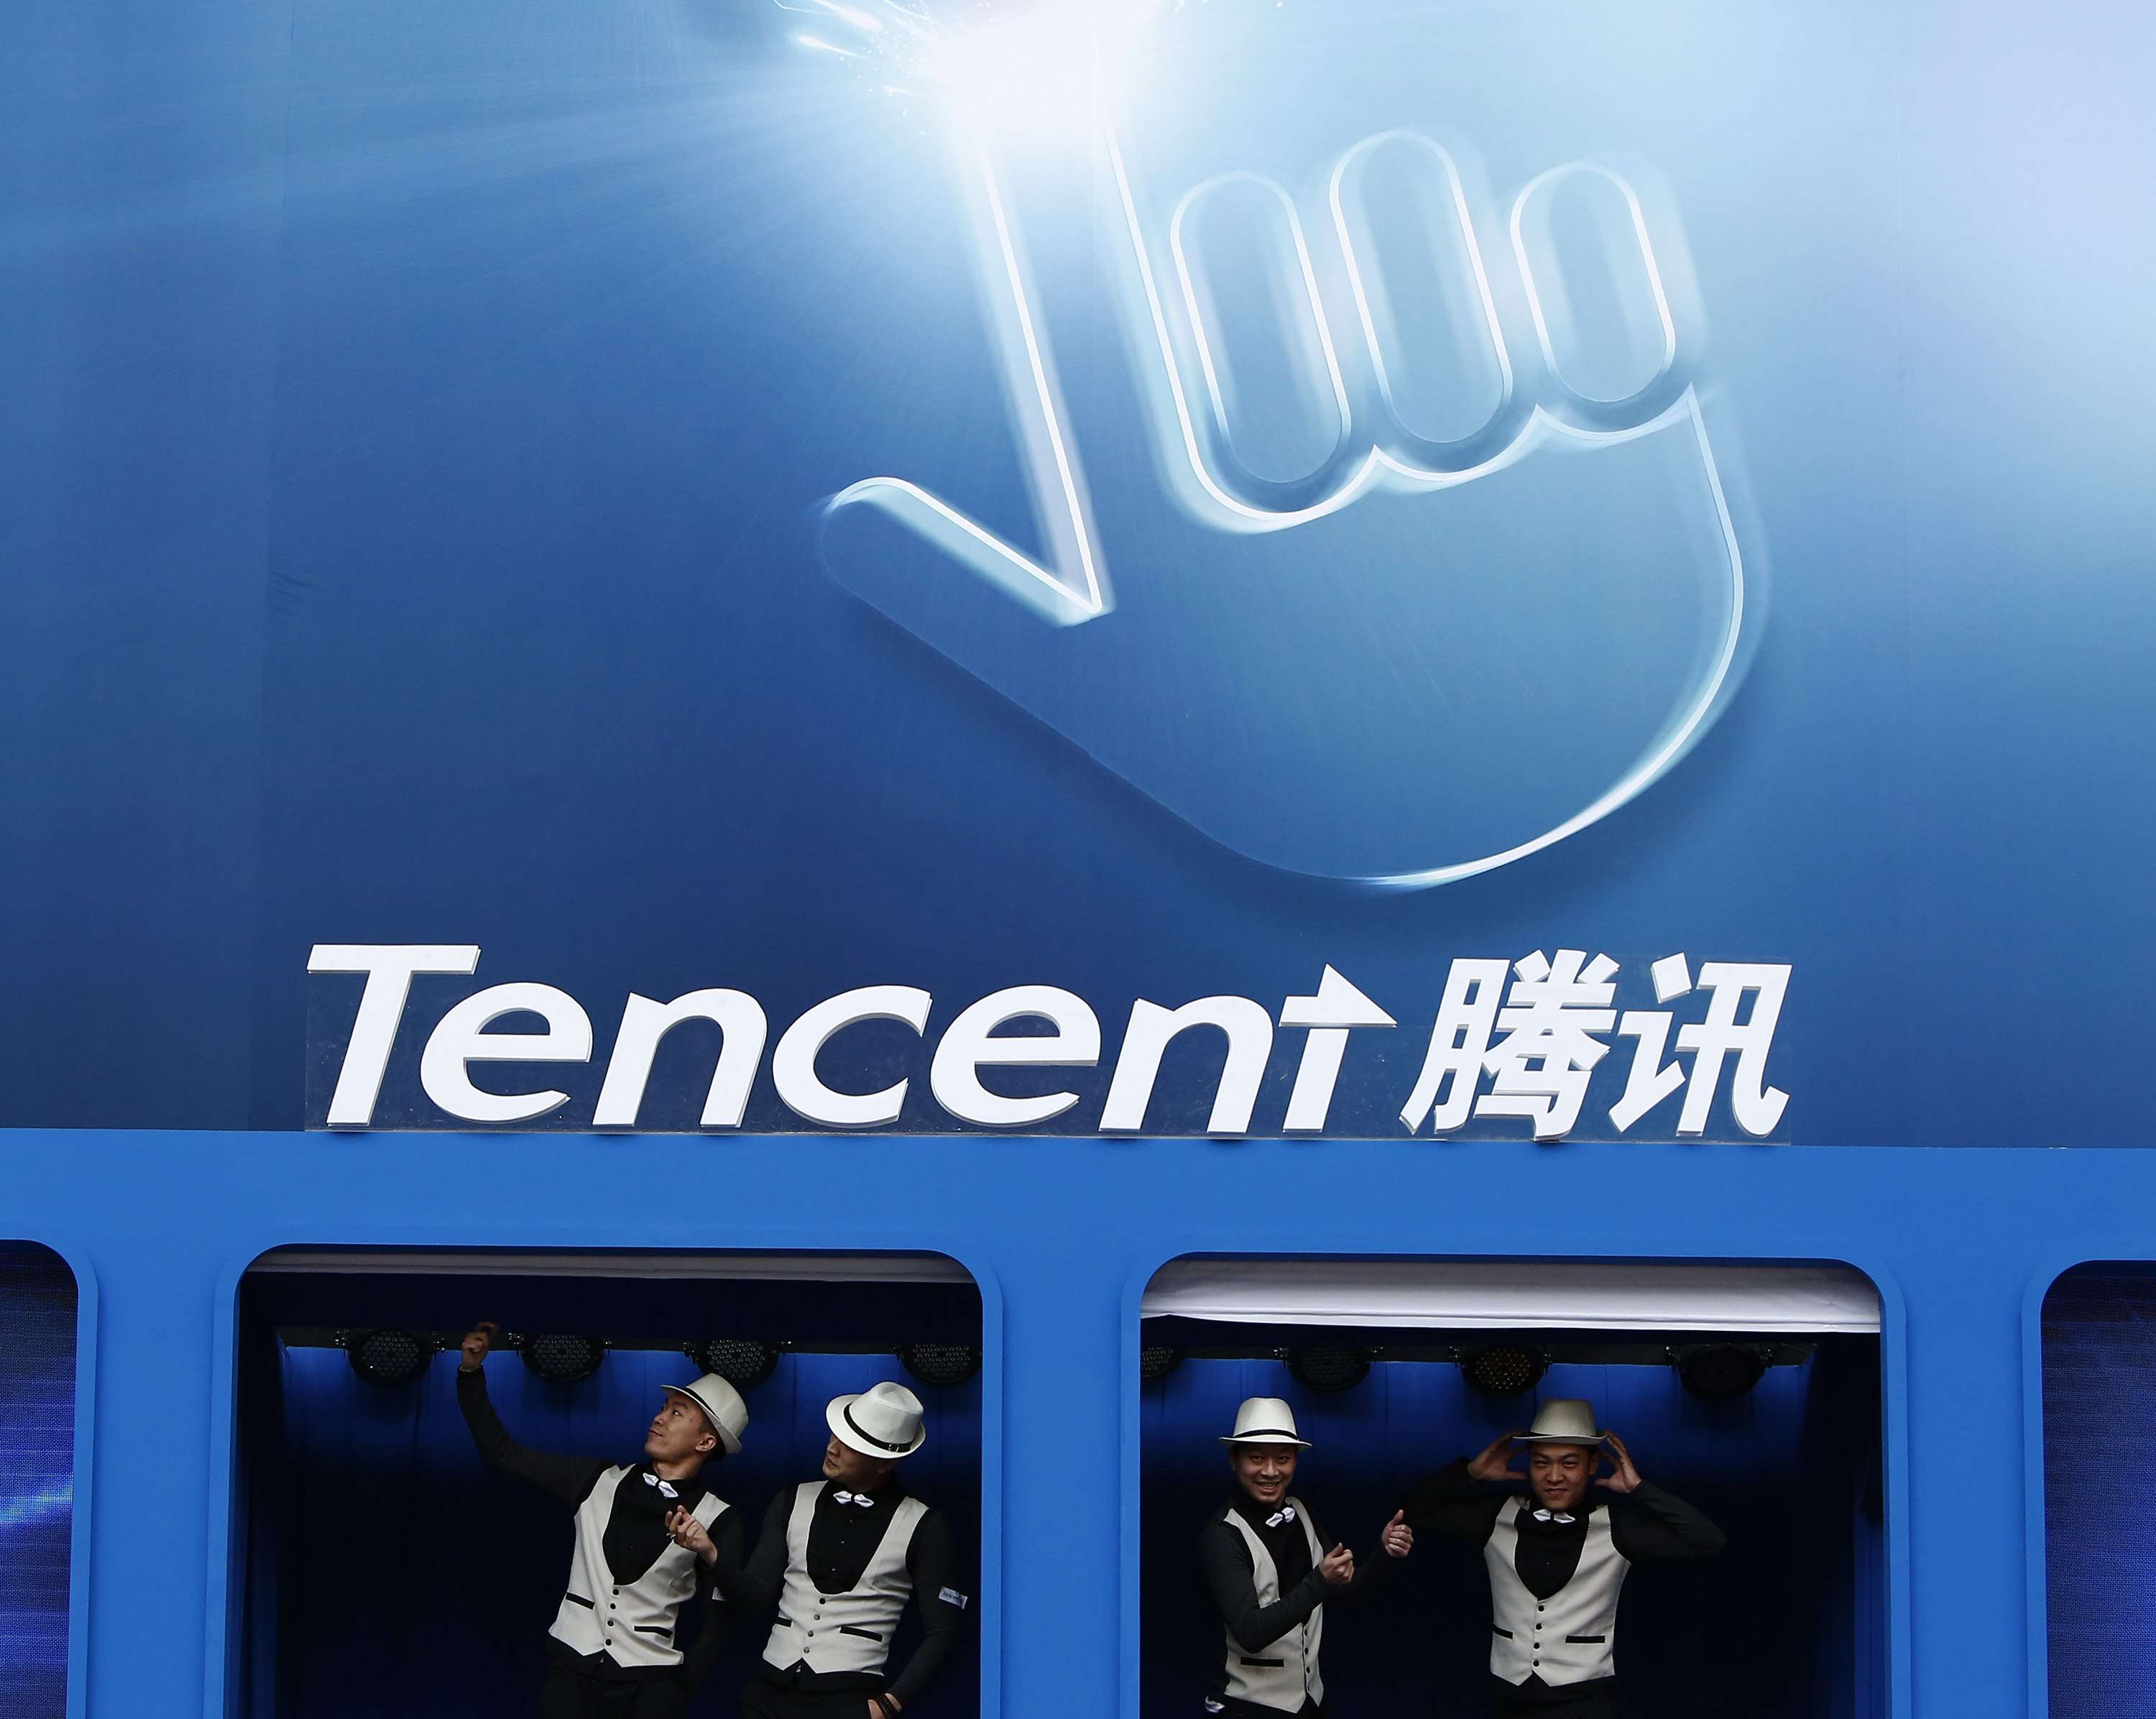 Chinese internet giant Tencent took No 1 spot in the annual survey on the best mainland China employers. Photo: Reuters